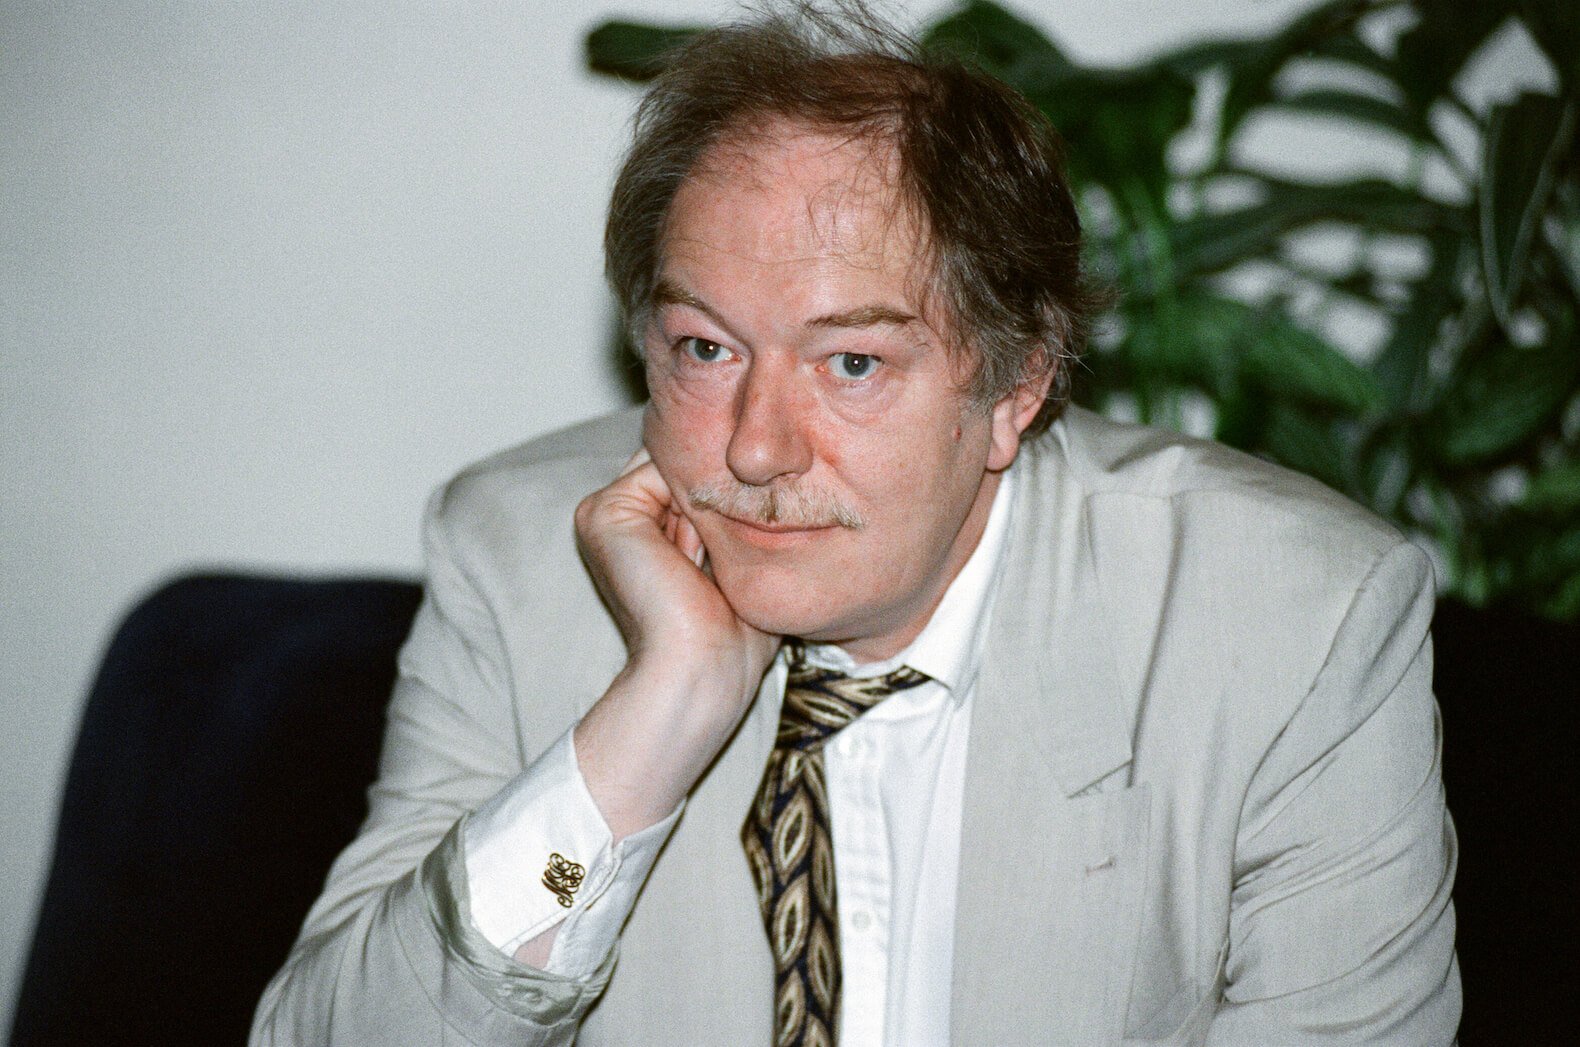 Michael Gambon wearing a suit in 1992